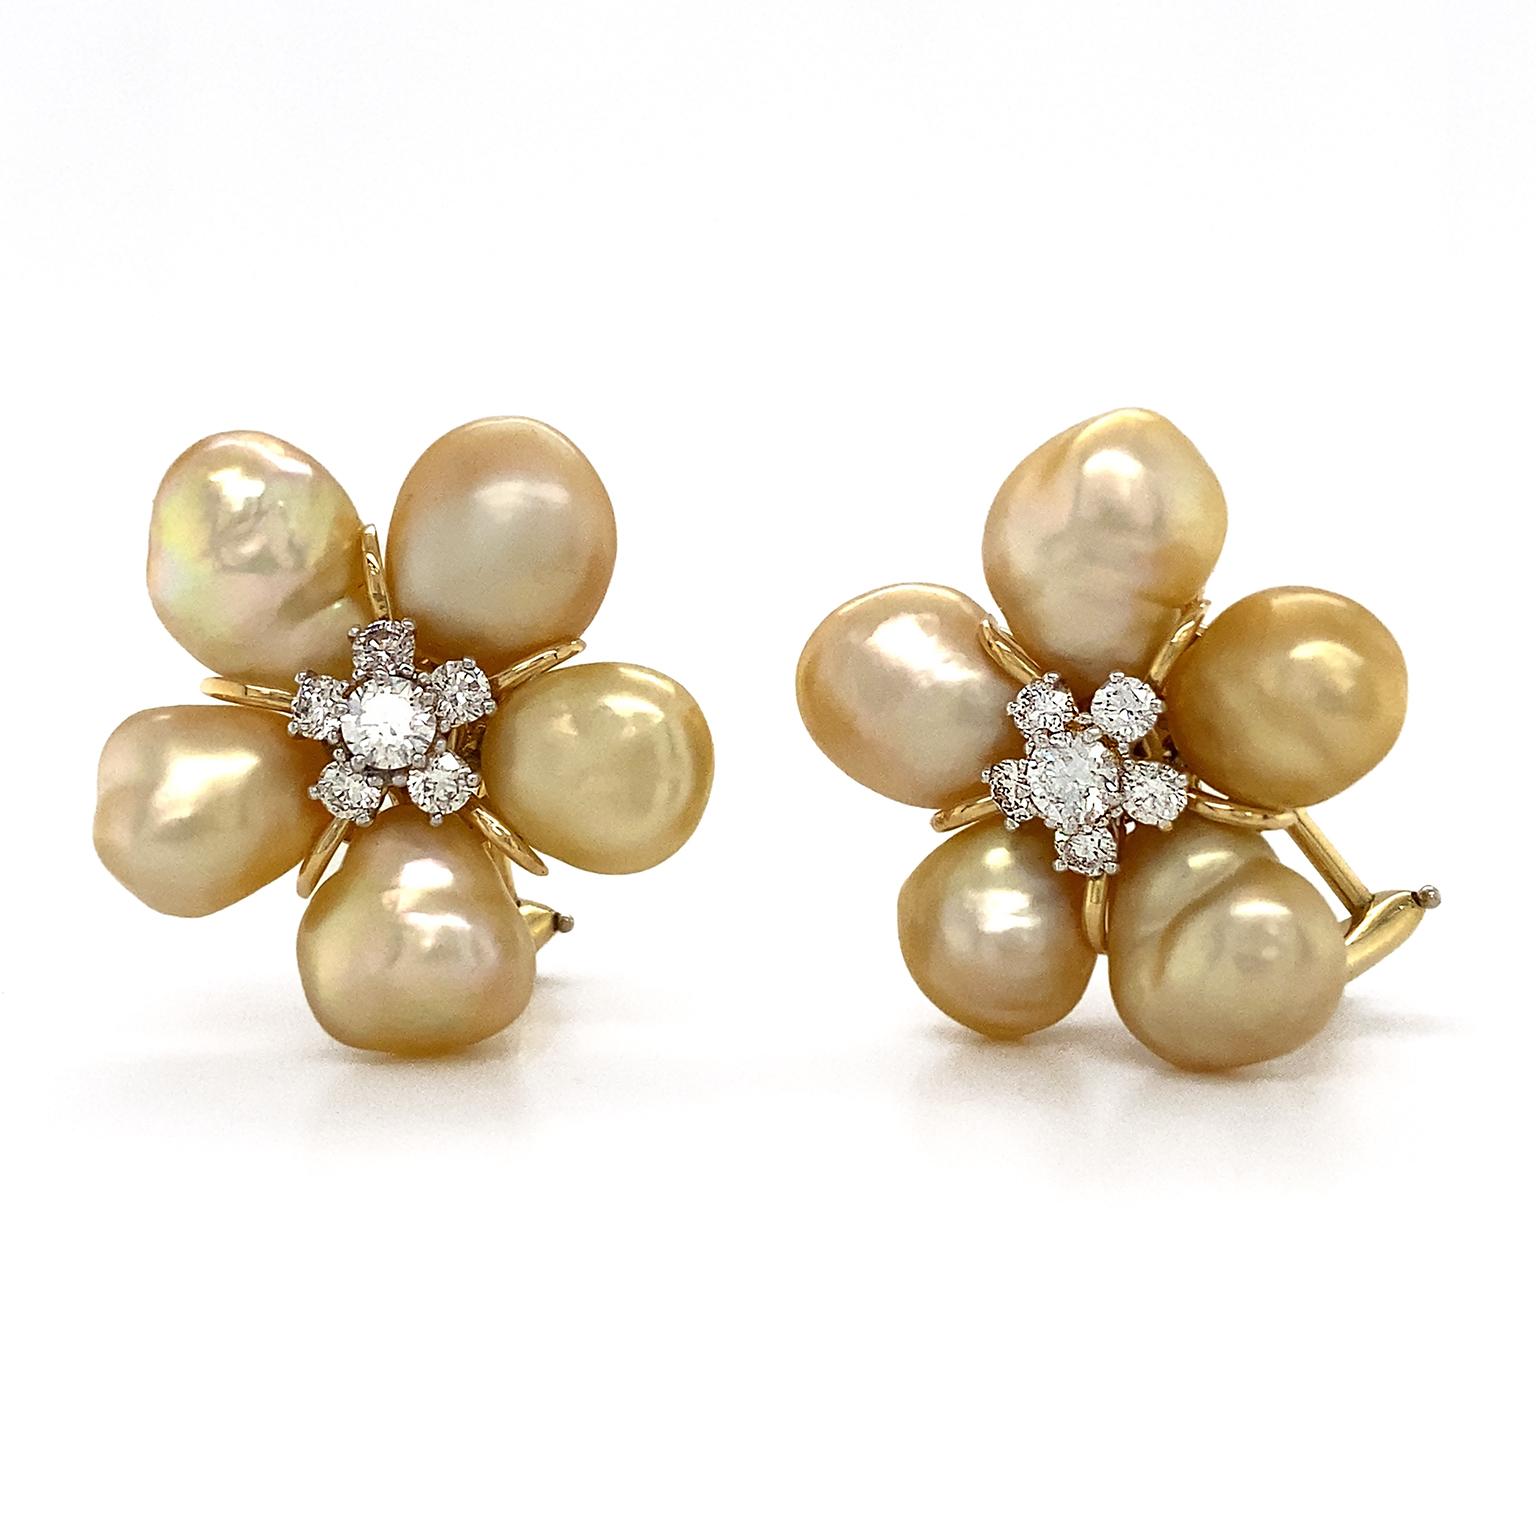 Flowers illustrated in gold toned Keshi pearls. Five pearls form a cluster, producing a delicate warm luster at every angle. Their 18k yellow gold settings provide another flicker of warm light. At the center five brilliant cut diamonds surround a